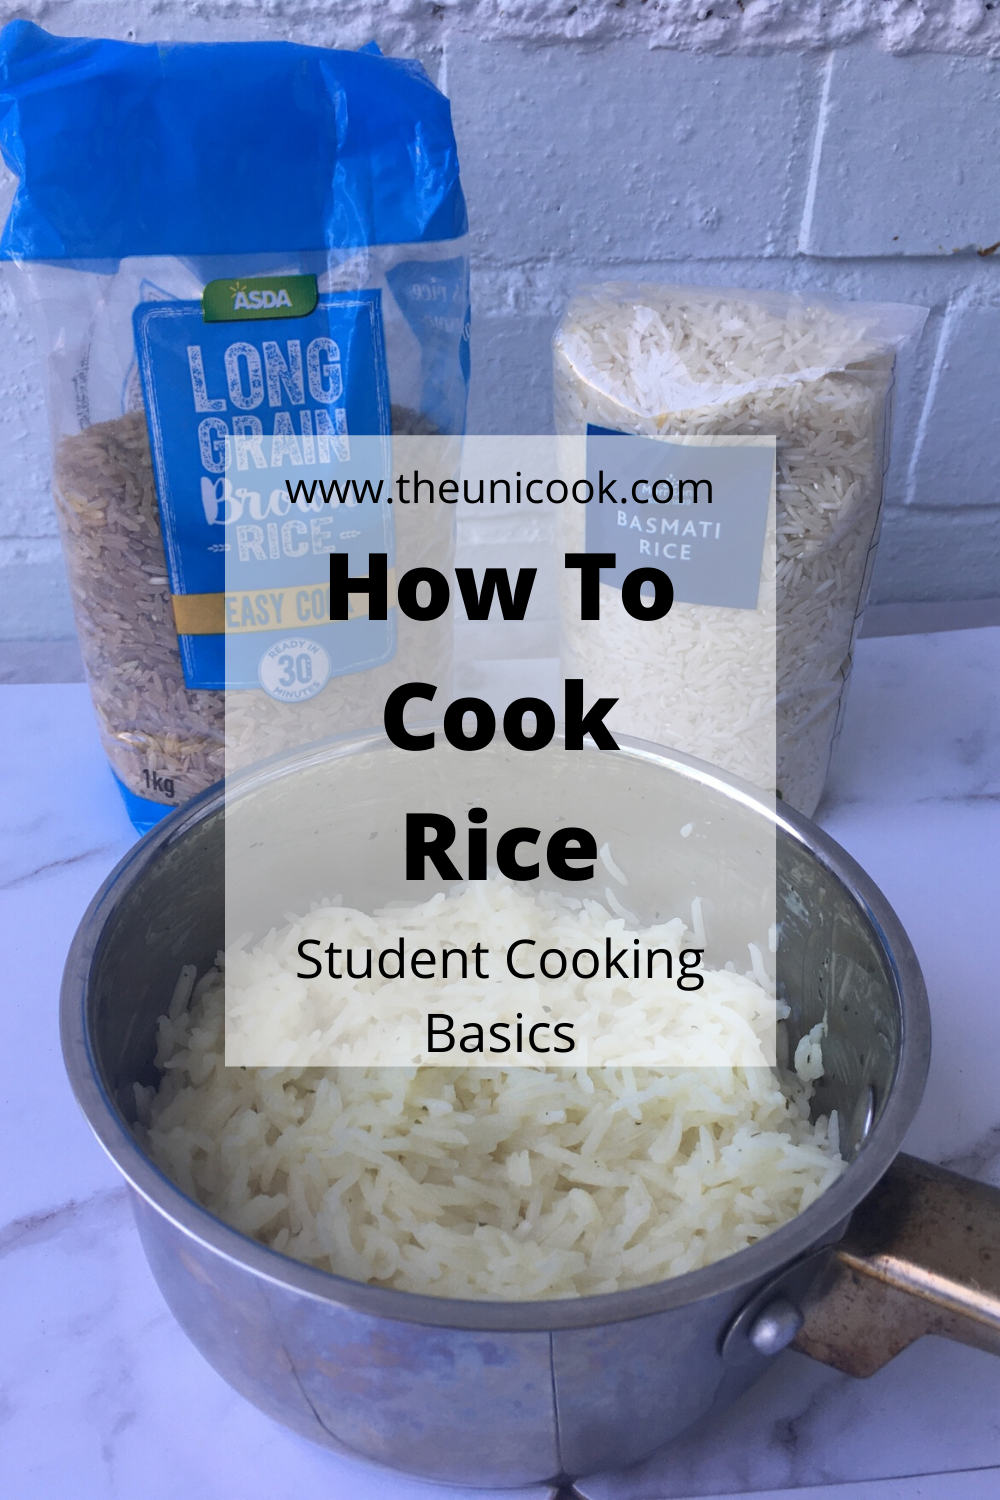 How to Cook Rice | Student Cooking Basics #3 - TheUniCook